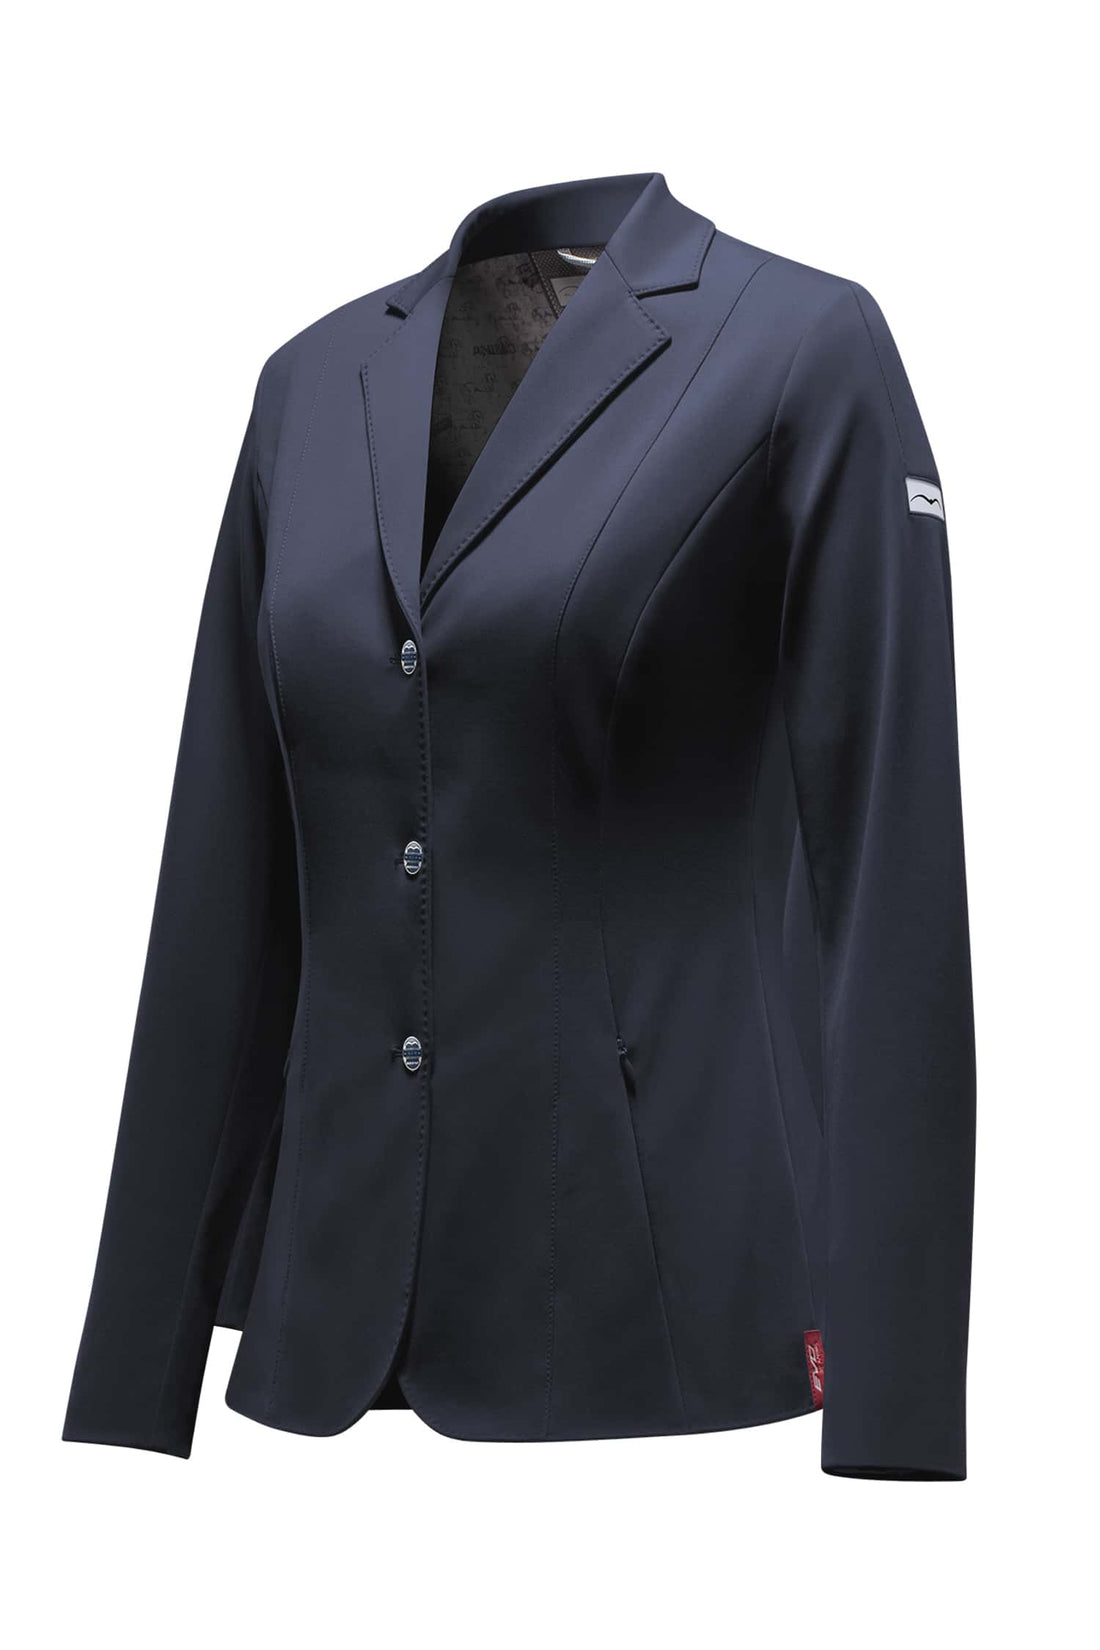 Animo Lud Navy Womens Competition Jacket